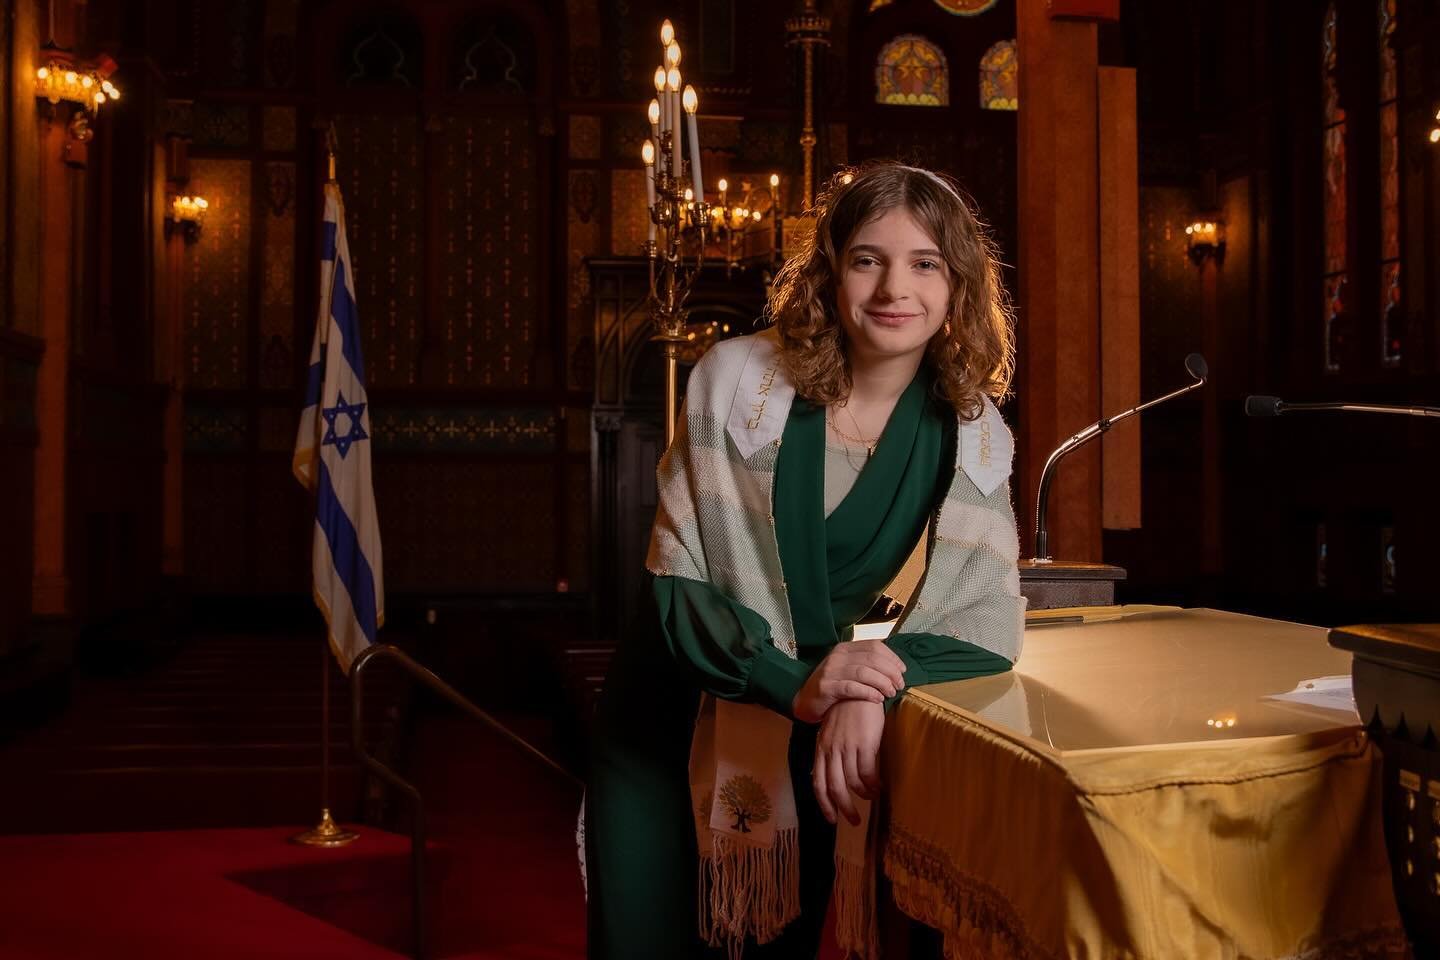 Today I celebrated with Natalie and her family as they prepared for her Bat Mitzvah. Plum Street Temple is absolutely breath taking! #batmitzvahgirl  #batmitzvahphotography #cincinnatibatmitzvah